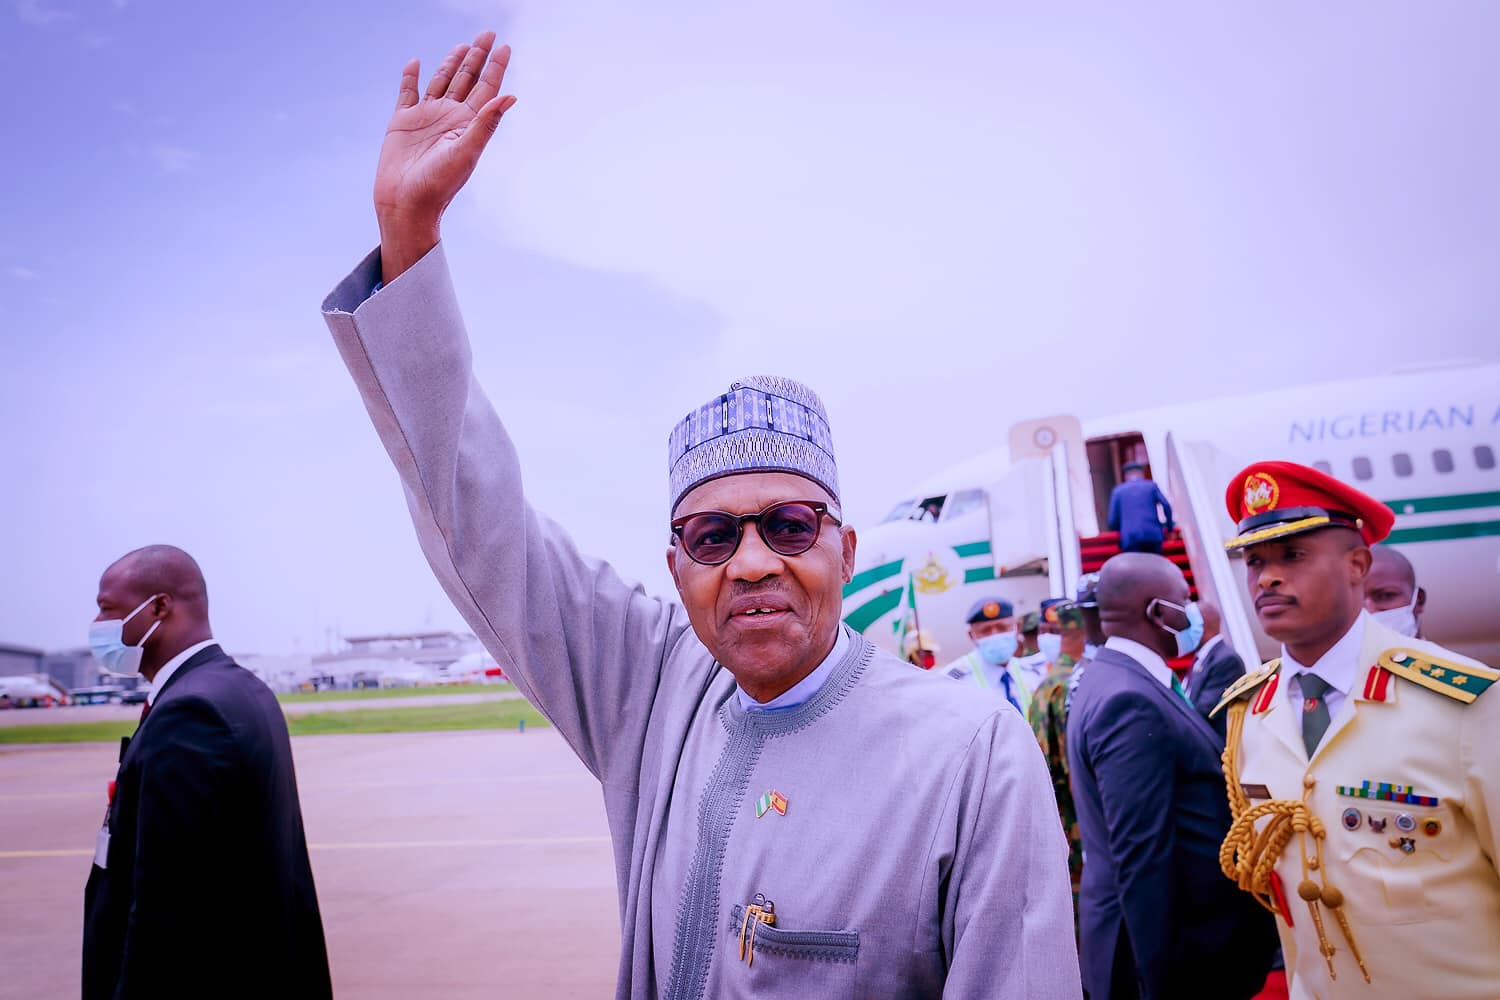 We Conquered Hunger In Rural Areas, President Buhari Tells Nigerians In A Farewell Speech